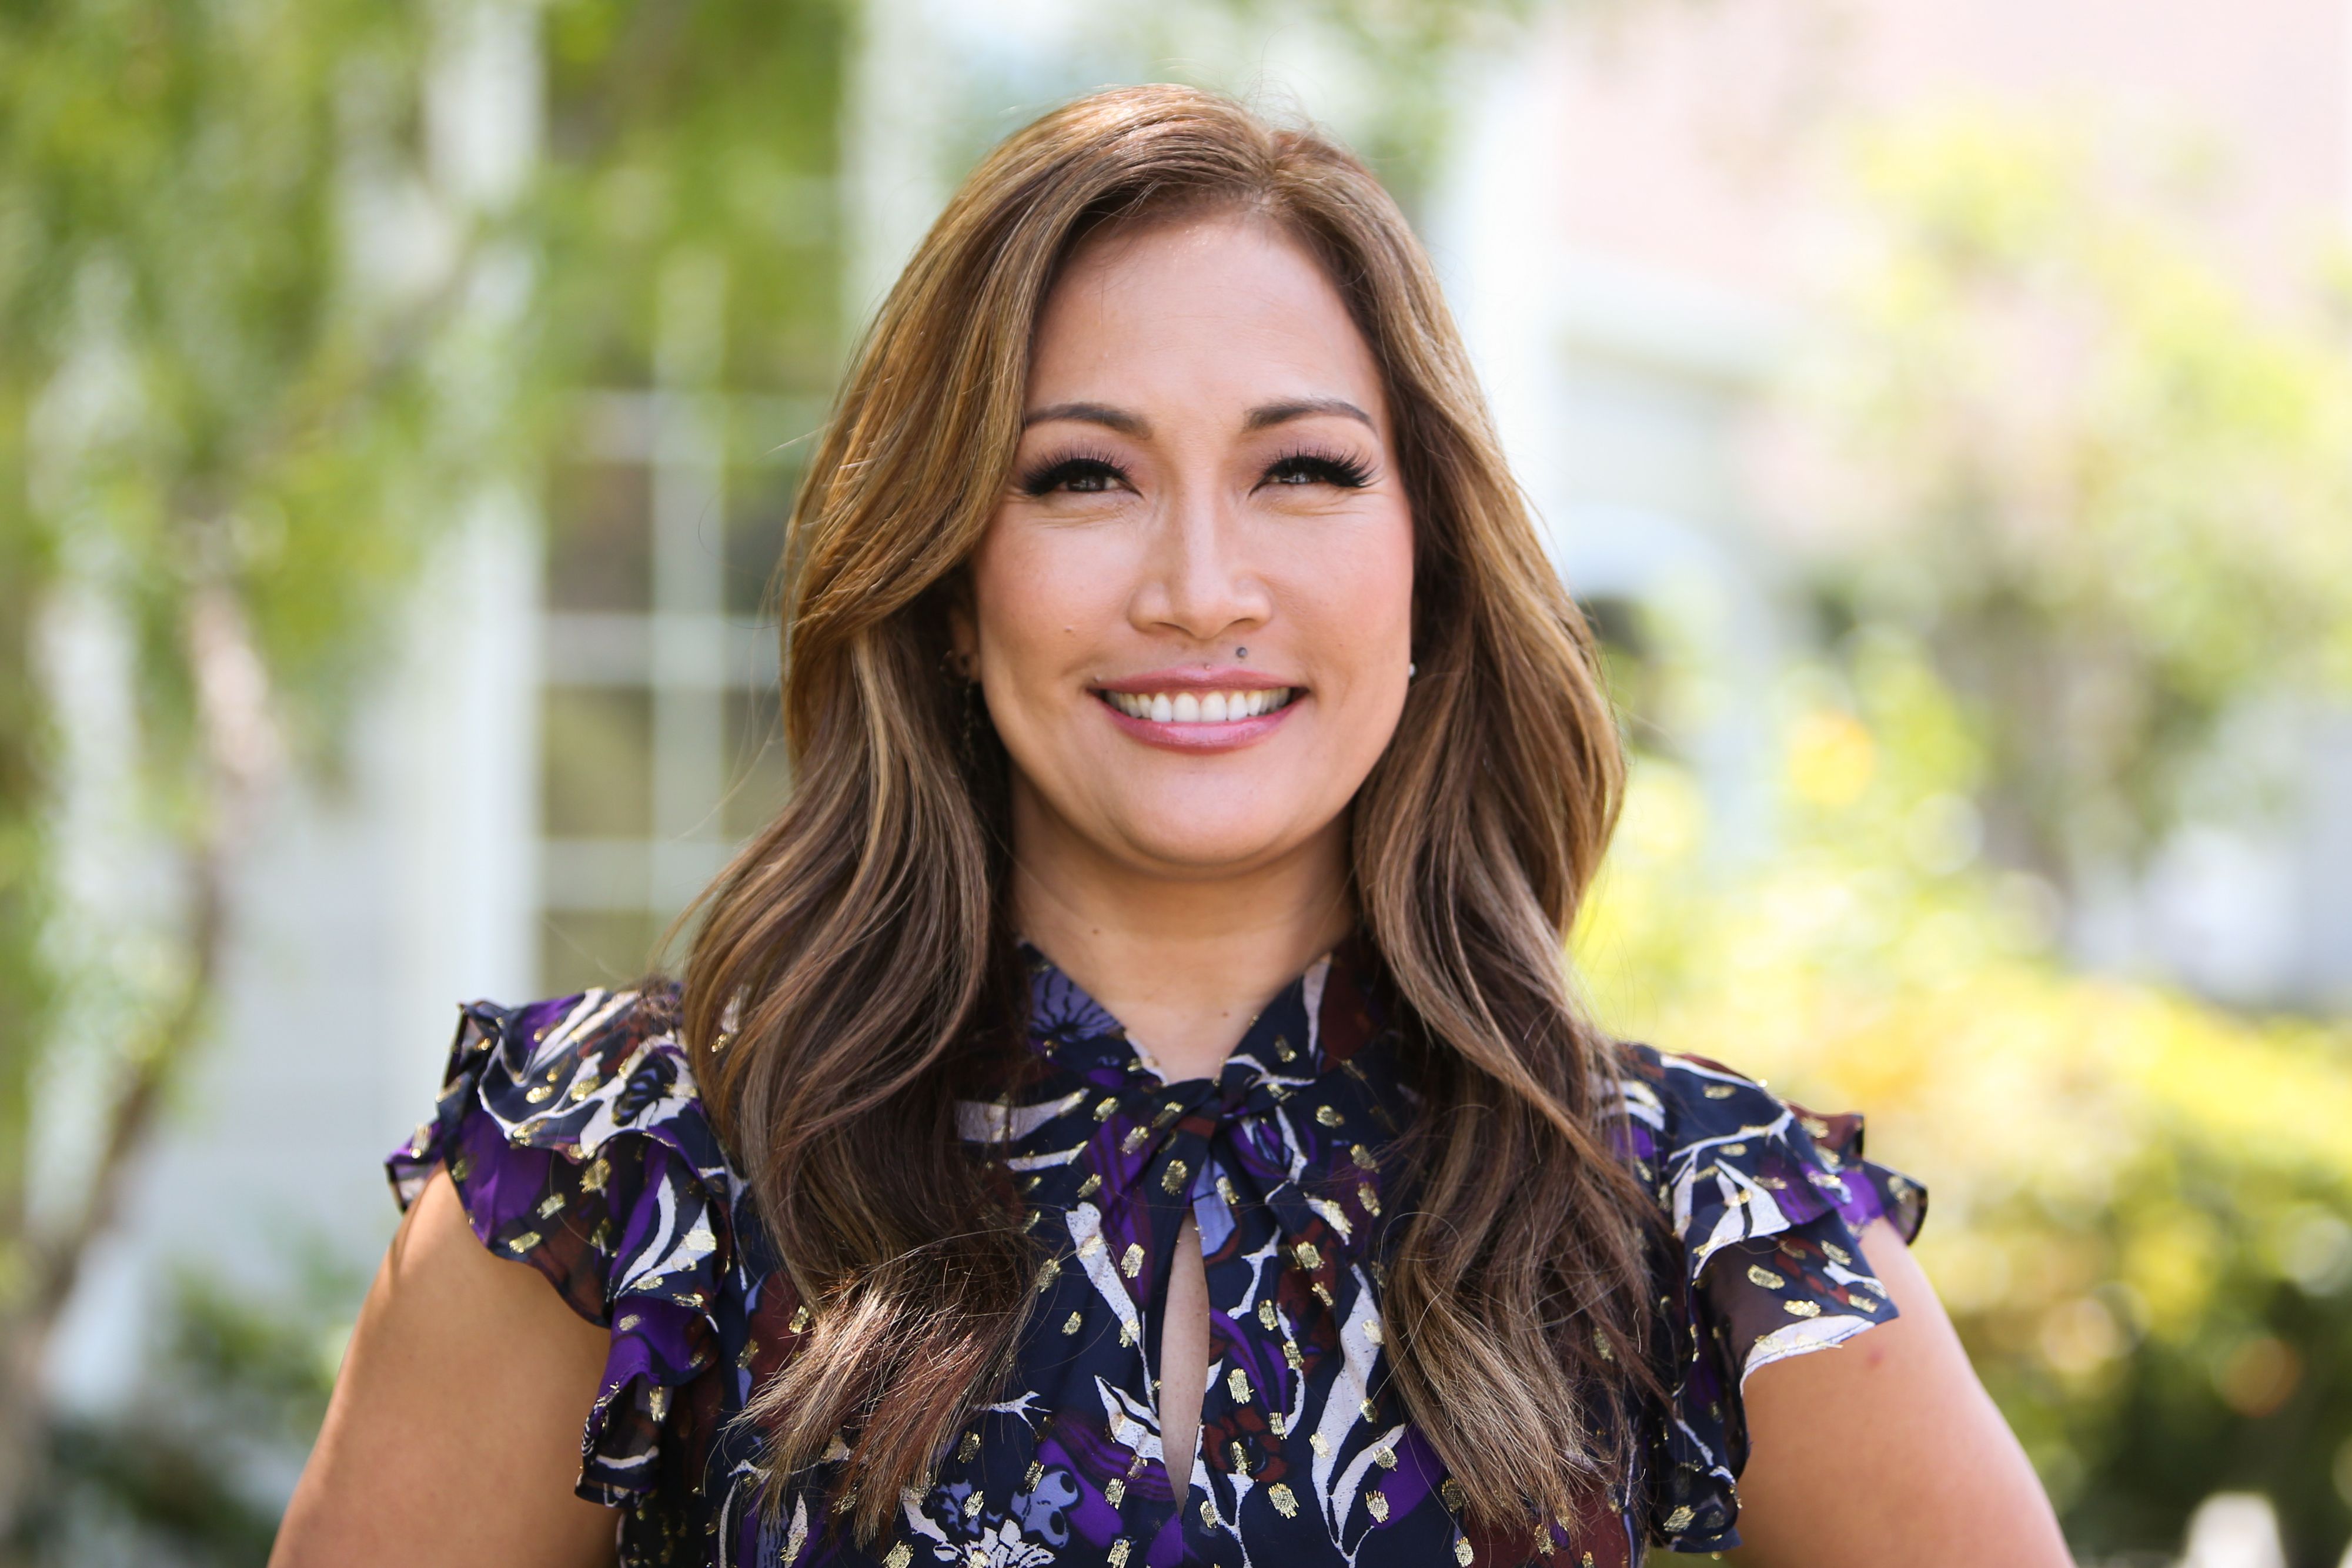 TV Personality Carrie Ann Inaba at Hallmark's "Home & Family" at Universal Studios Hollywood on May 3, 2019 | Photo: Getty Images